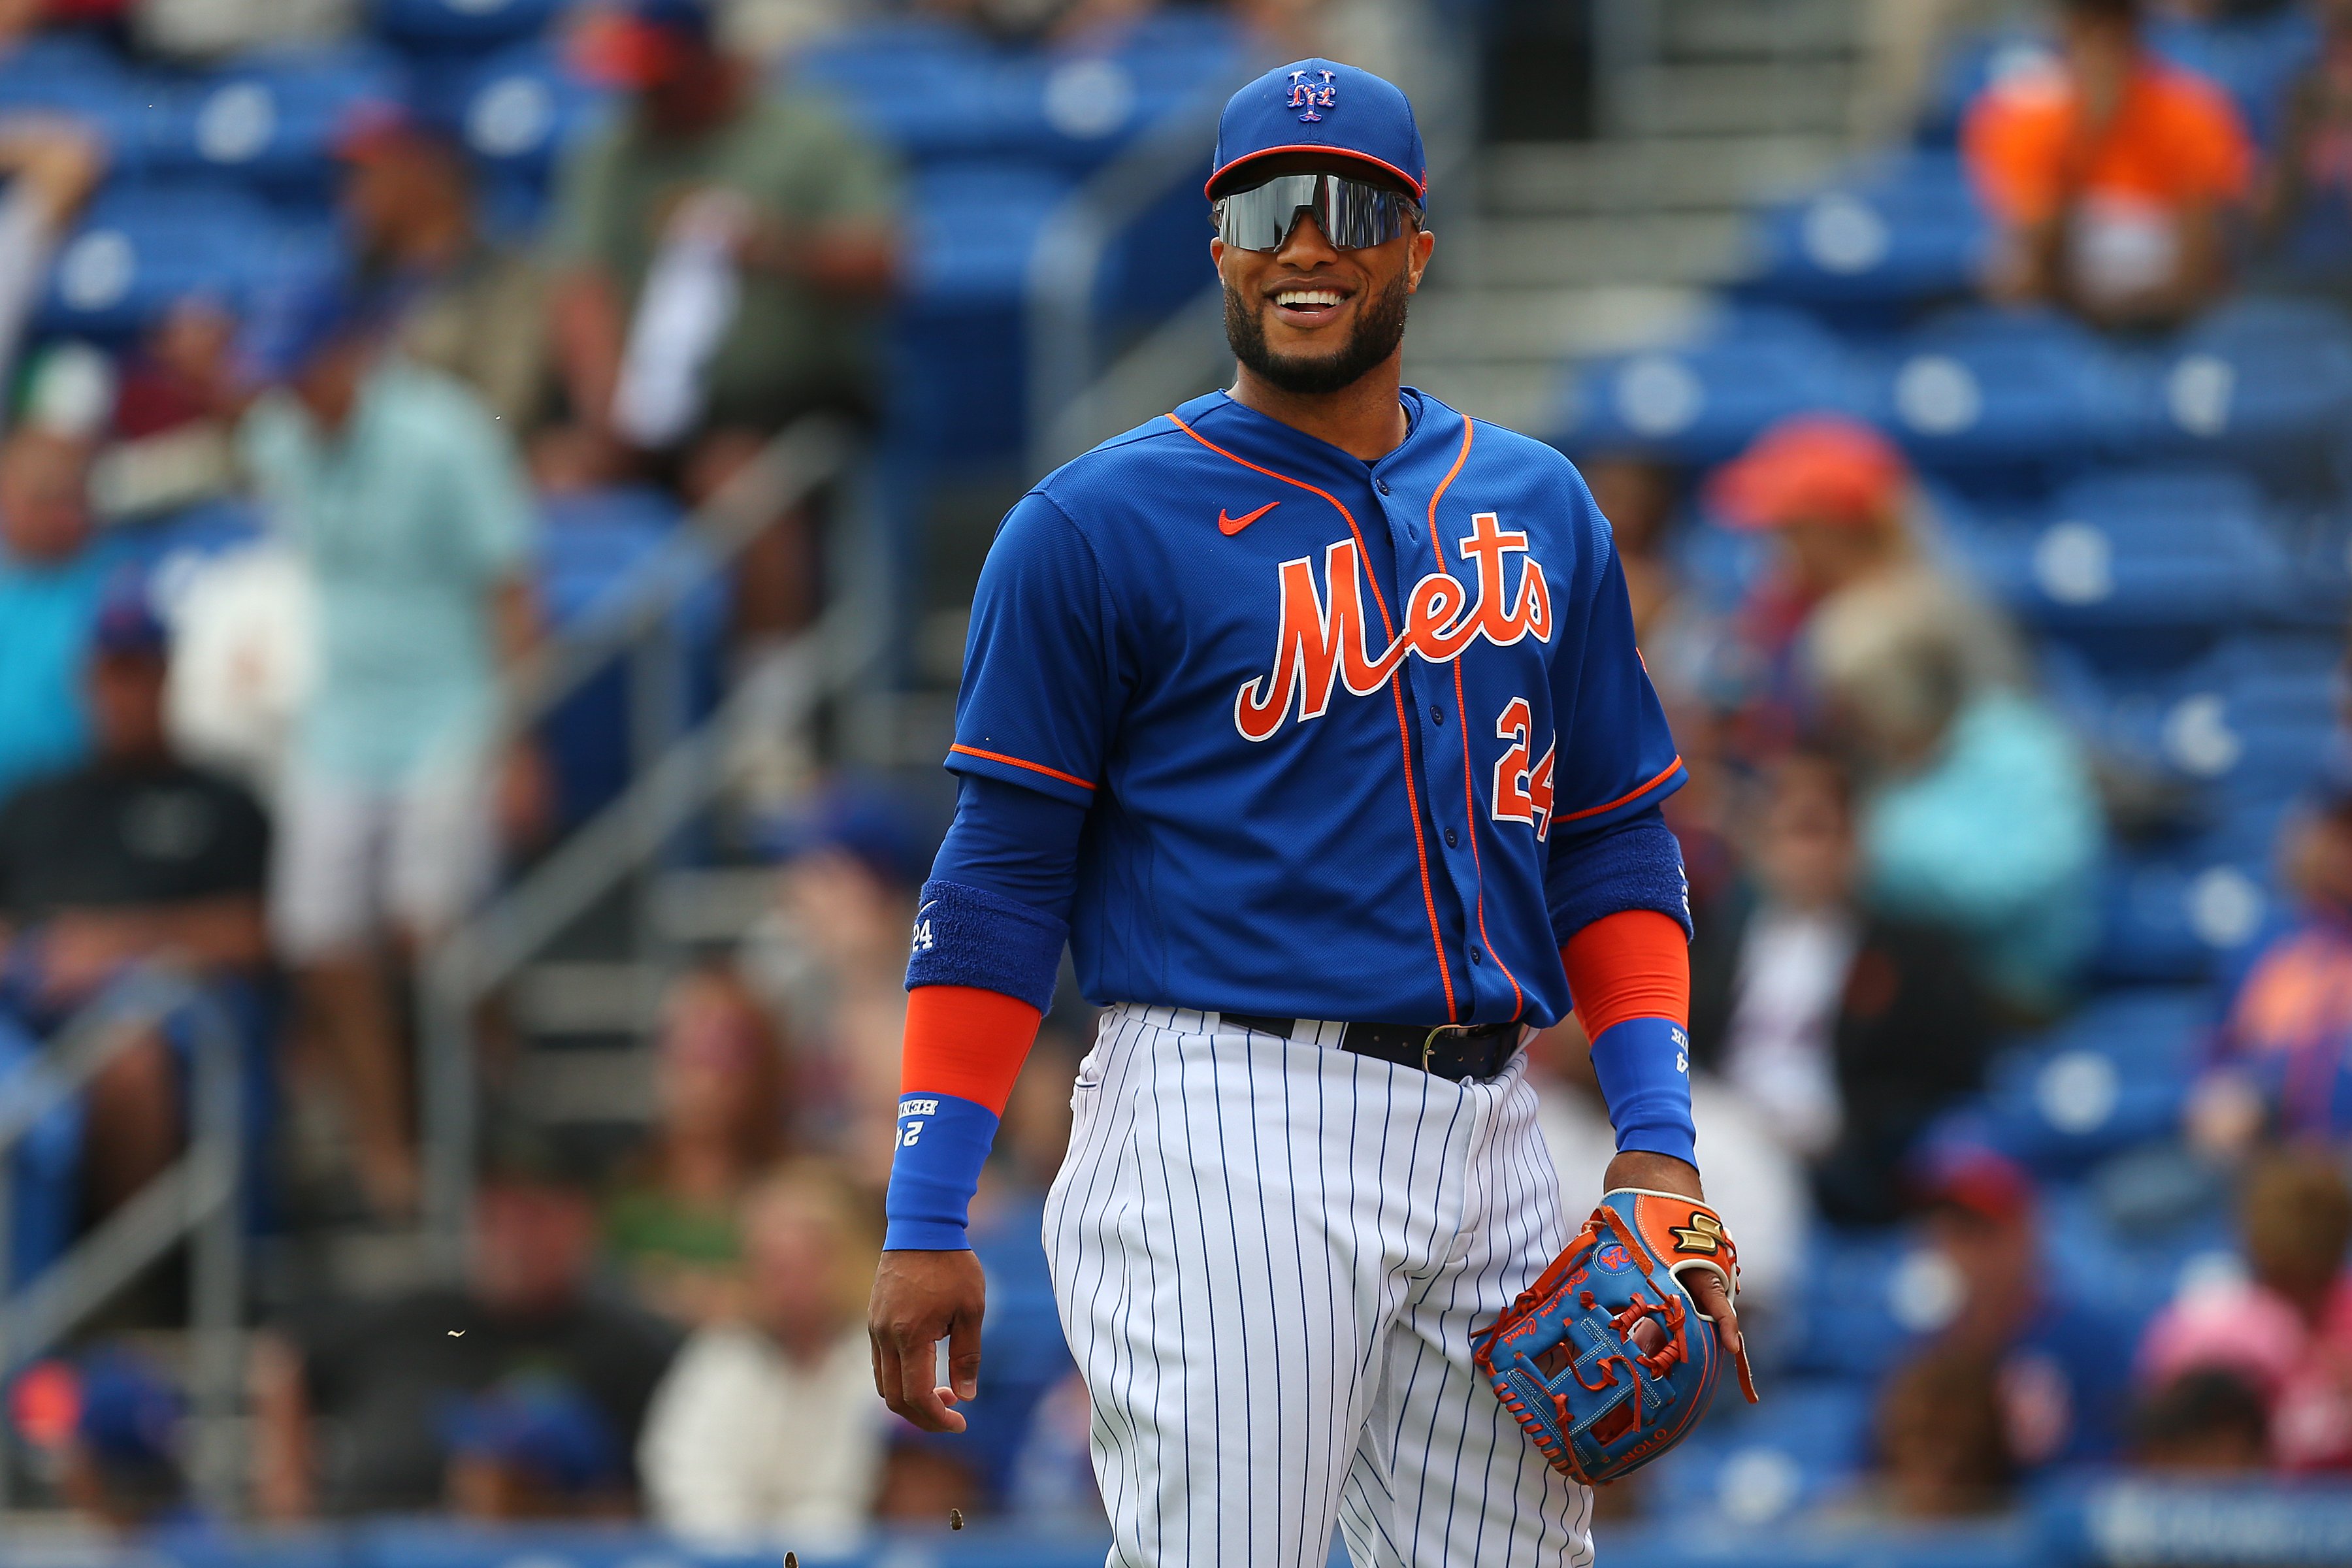 CBS Sports on X: Robinson Cano is set to start for the Braves tonight  against the Mets. Cano was released by the Mets earlier this year, and owe  him close to $20M.